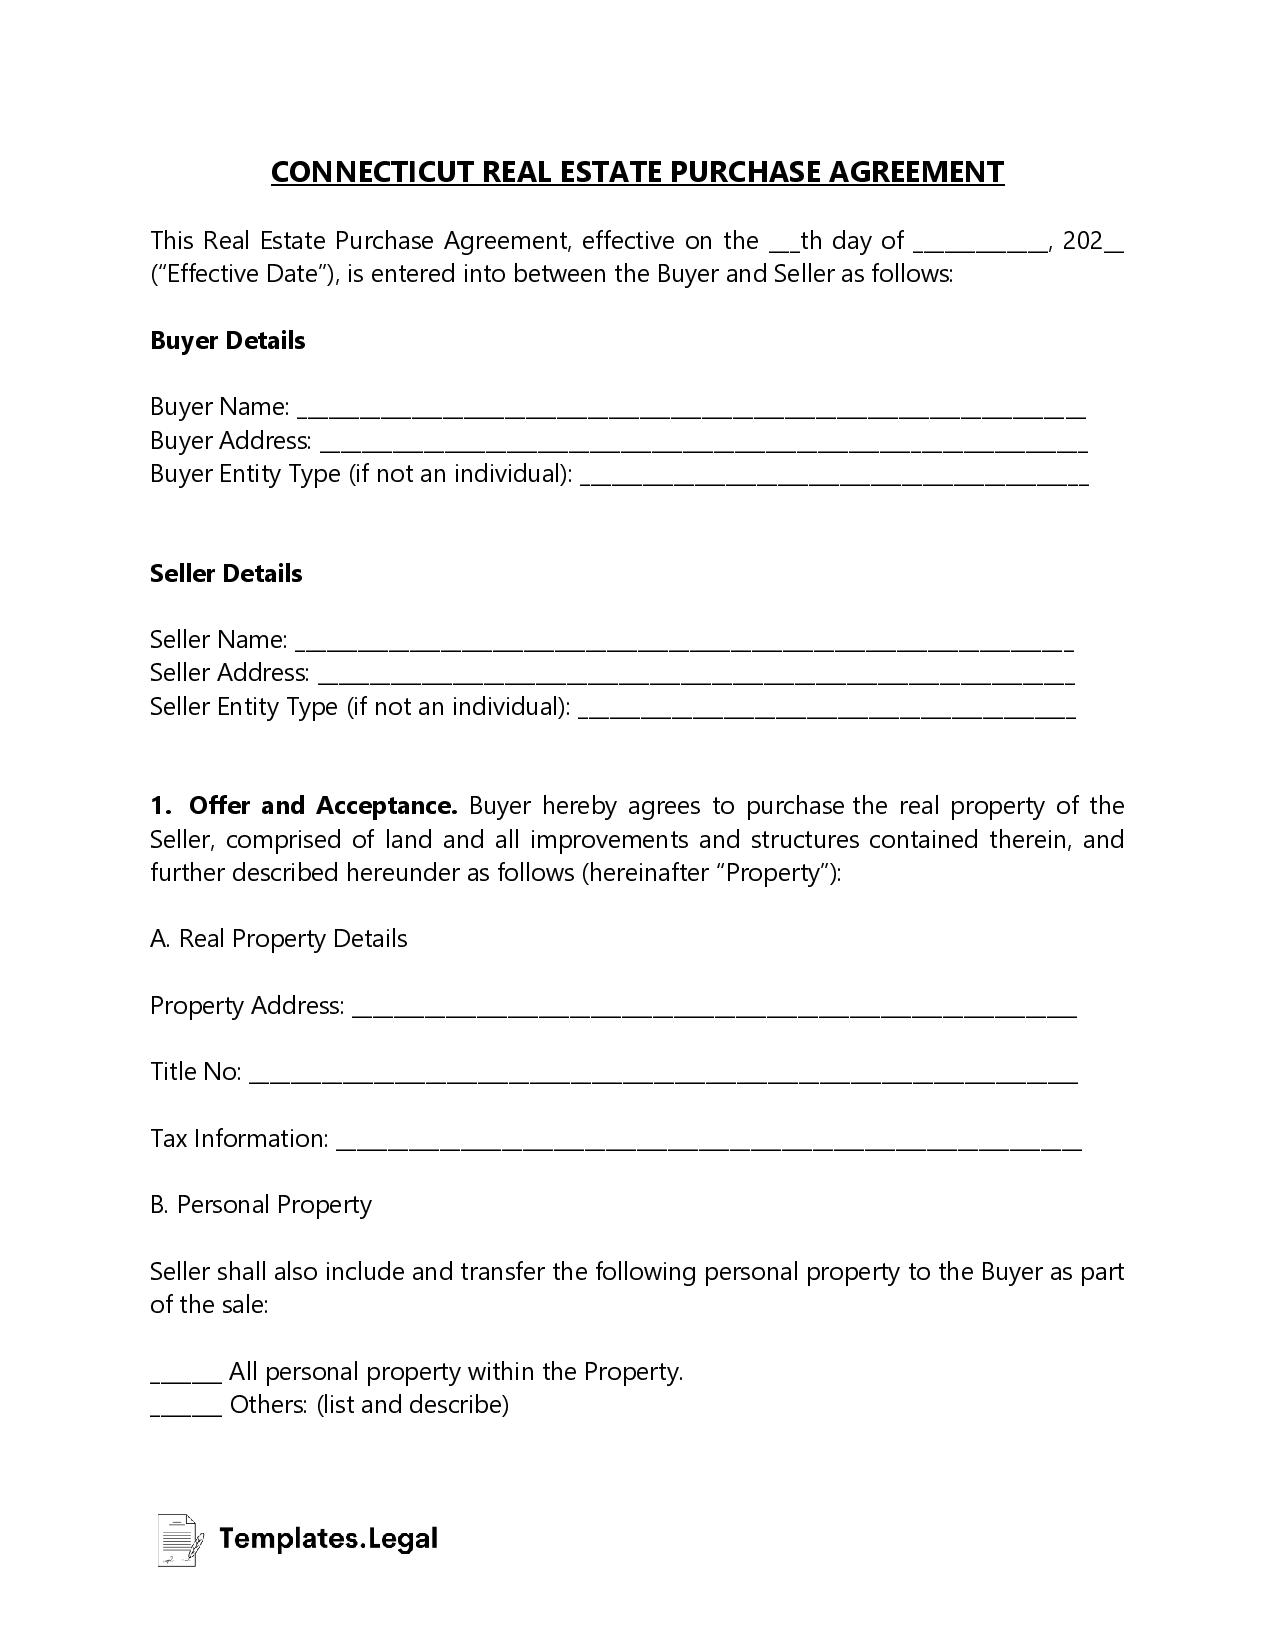 Connecticut Real Estate Purchase Agreement - Templates.Legal